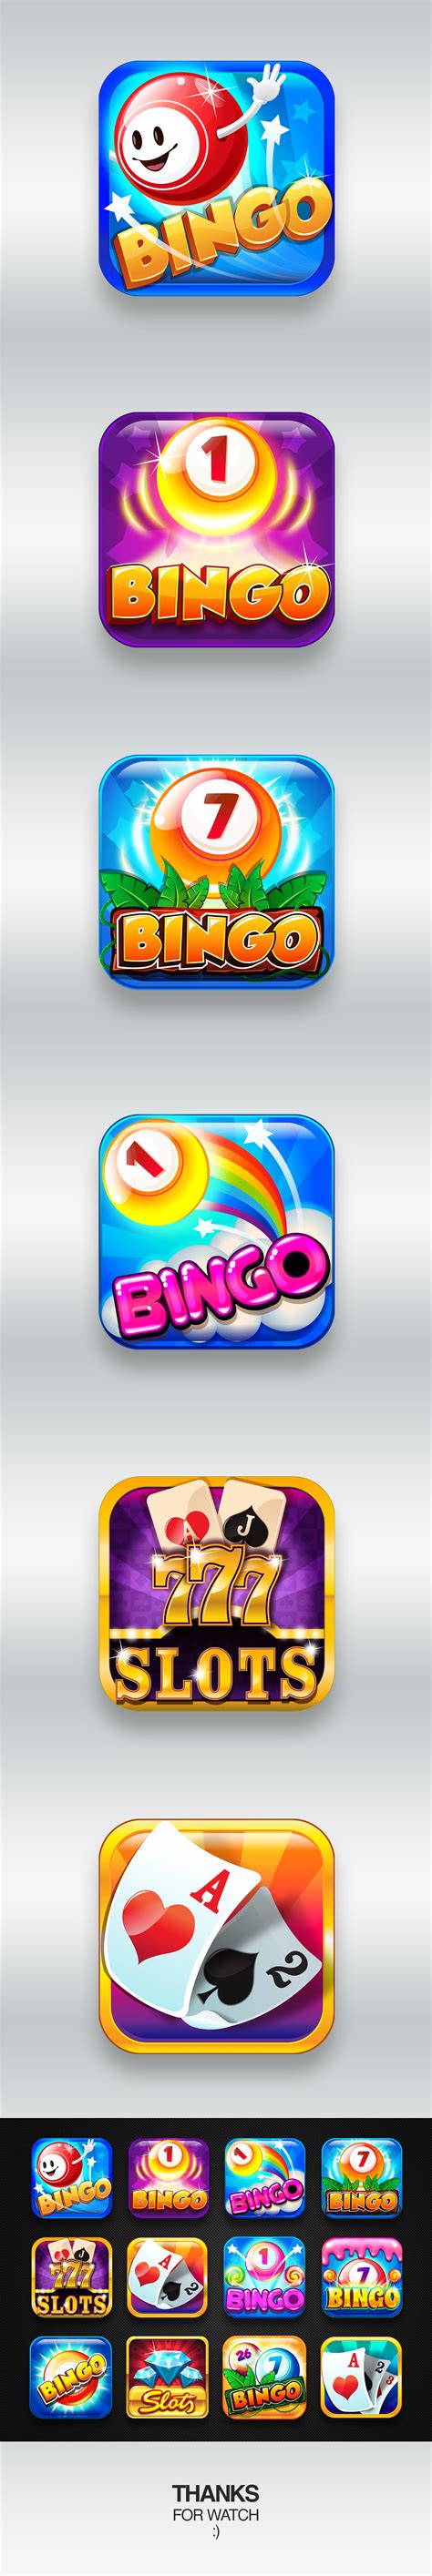 Mobile Game Icons Design On Behance